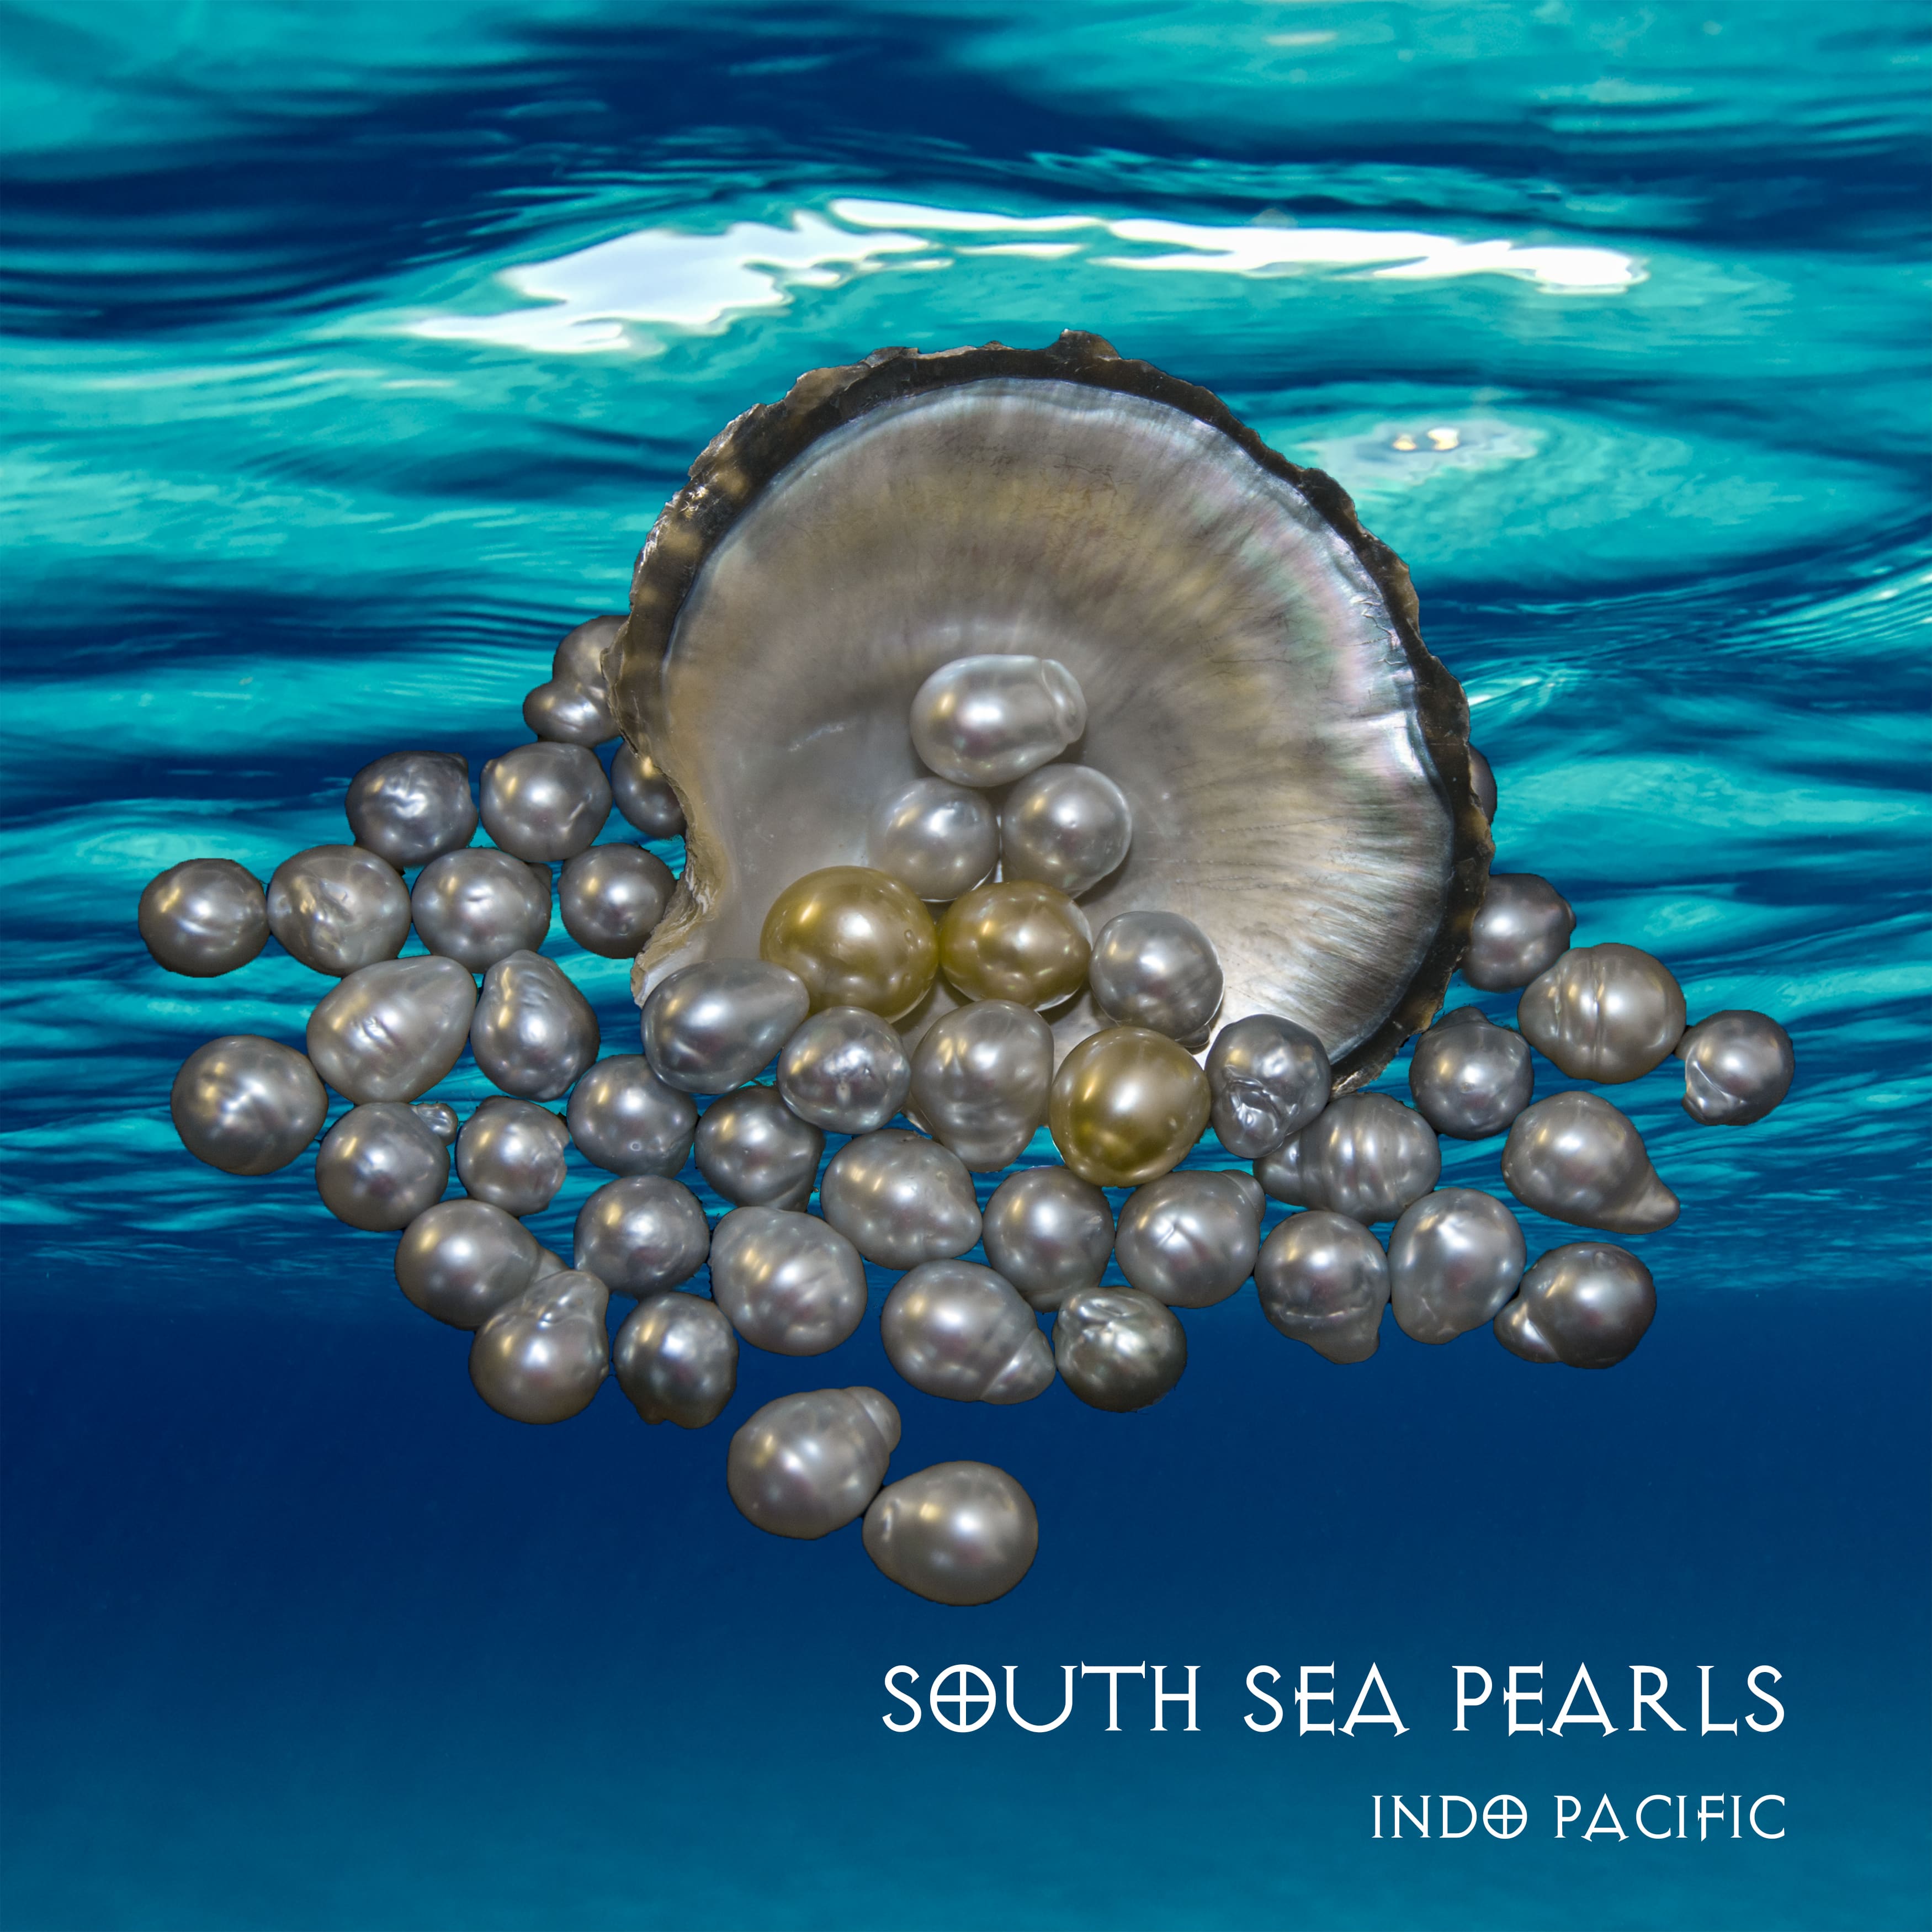 Picture of South Sea Pearls for this Category of pearls